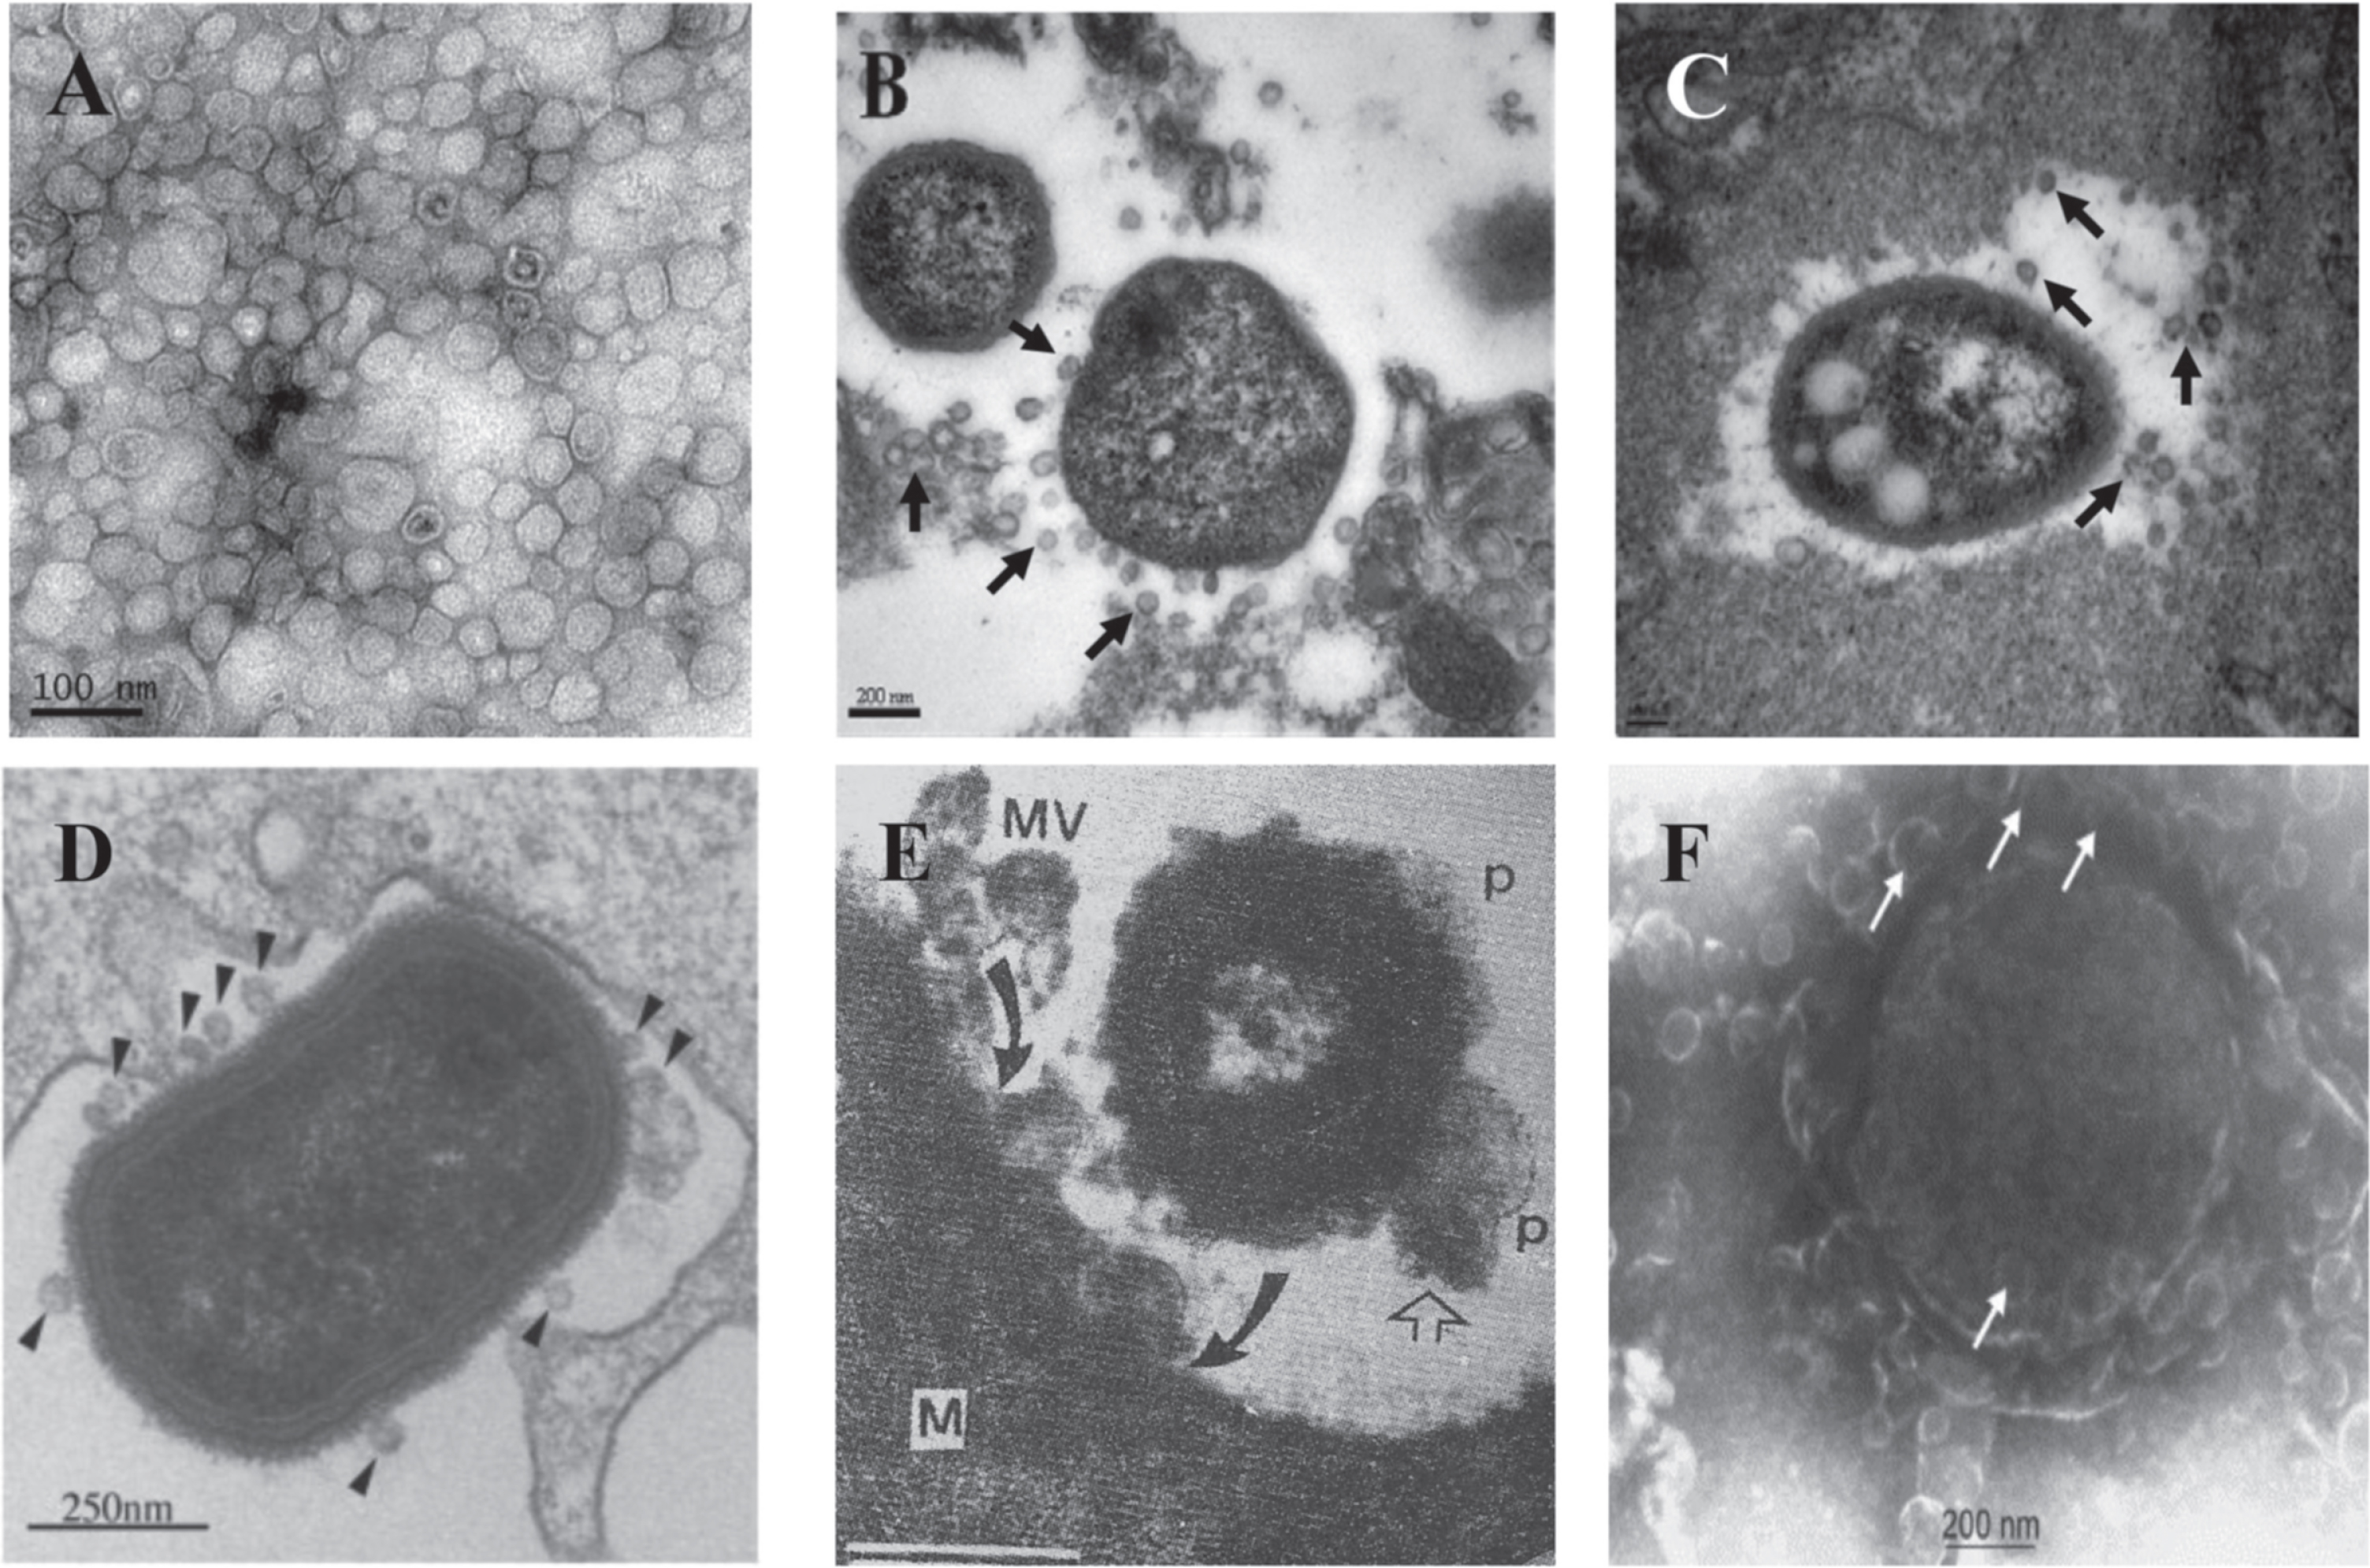 Secretion of OMVs in situ from A. baumanniiduring in vitro culture and in vivo infection. A) Transmission electron micrograph of OMVs prepared from A. baumannii ATCC 19606T cultured in LB broth for 24 h. B, C) Secretion of OMVs from A. baumannii ATCC 19606T in a murine pneumonia model. Mice were infected with 16107 CFU of bacteria intratracheally and sacrificed 48 h after bacterial injection. Arrows indicate the OMVs secreted from A. baumannii. D) TEM image of P. gingivalis entering human epithelial cell and producing numerous OMVs (arrowheads). E) TEM of human Salmonella organism bearing periplasmic organelles (p, line arrow) on its surface and releasing bacterial outer membrane vesicles (MV) being endocytosed (curved arrow) by macrophage cell (M) in chicken ileum in vivo. F) Meningococcus cell in plasma of acute meningitis patient showing blebbing of numerous outer membrane vesicles with a blood level of LPS of 1700 endotoxin units/mL or approx. 170 ng/ml of purified E. coli LPS (65,000X mag.) Panels A-C are reprinted with permission from Jin JS, Kwon SO, Moon DC, Gurung M, Lee JH, Kim SI, Lee JC (2011) Acinetobacter baumannii secretes cytotoxic outer membrane protein A via outer membrane vesicles. PLoS One 6, e17027, under the Creative Commons Attribution License. Panel D is reprinted from Amano A, Takeuchi H, Furuta N (2010) Outer membrane vesicles function as offensive weapons in host-parasite interactions. Microbes Infect 12, 791–798, with permission Elsevier. Panel E is reprinted from Wikiwant (https://www.wikiwand.com/en/Membrane_vesicle_trafficking) under the Creative Commons Attribution-ShareAlike 4.0 International License (CC BY-SA). Panel F is reprinted from Namork E, Brandtzaeg P (2002) Fatal meningococcal septicaemia with “blebbing” meningococcus. Lancet 360, 1741, with permission from Elsevier.